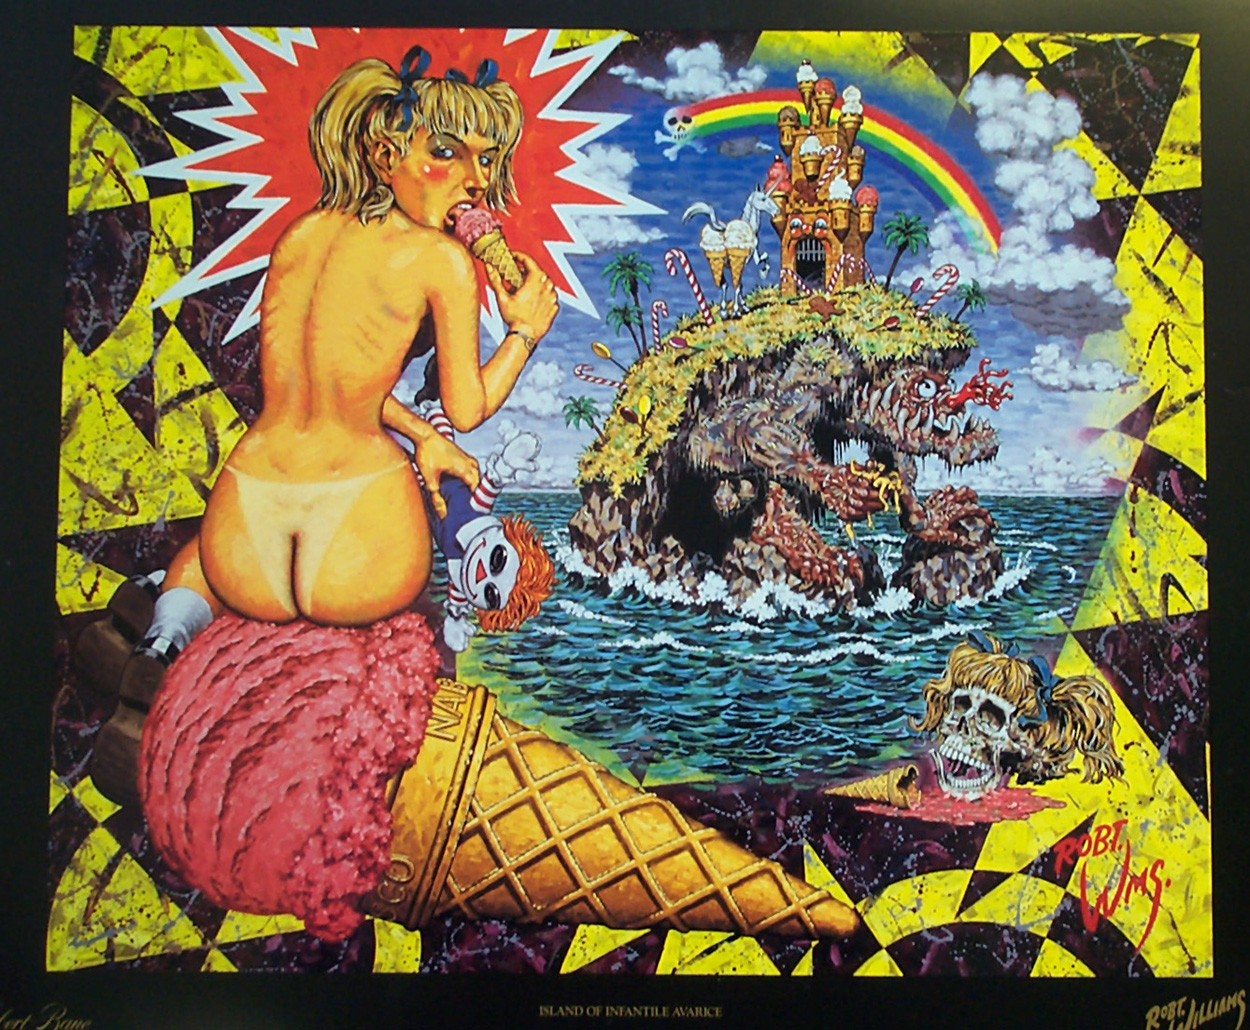 Robert Williams - Set of 10 Prints (Limited Edition Prints) art by Robert Williams Art at The Illustration Art Gallery